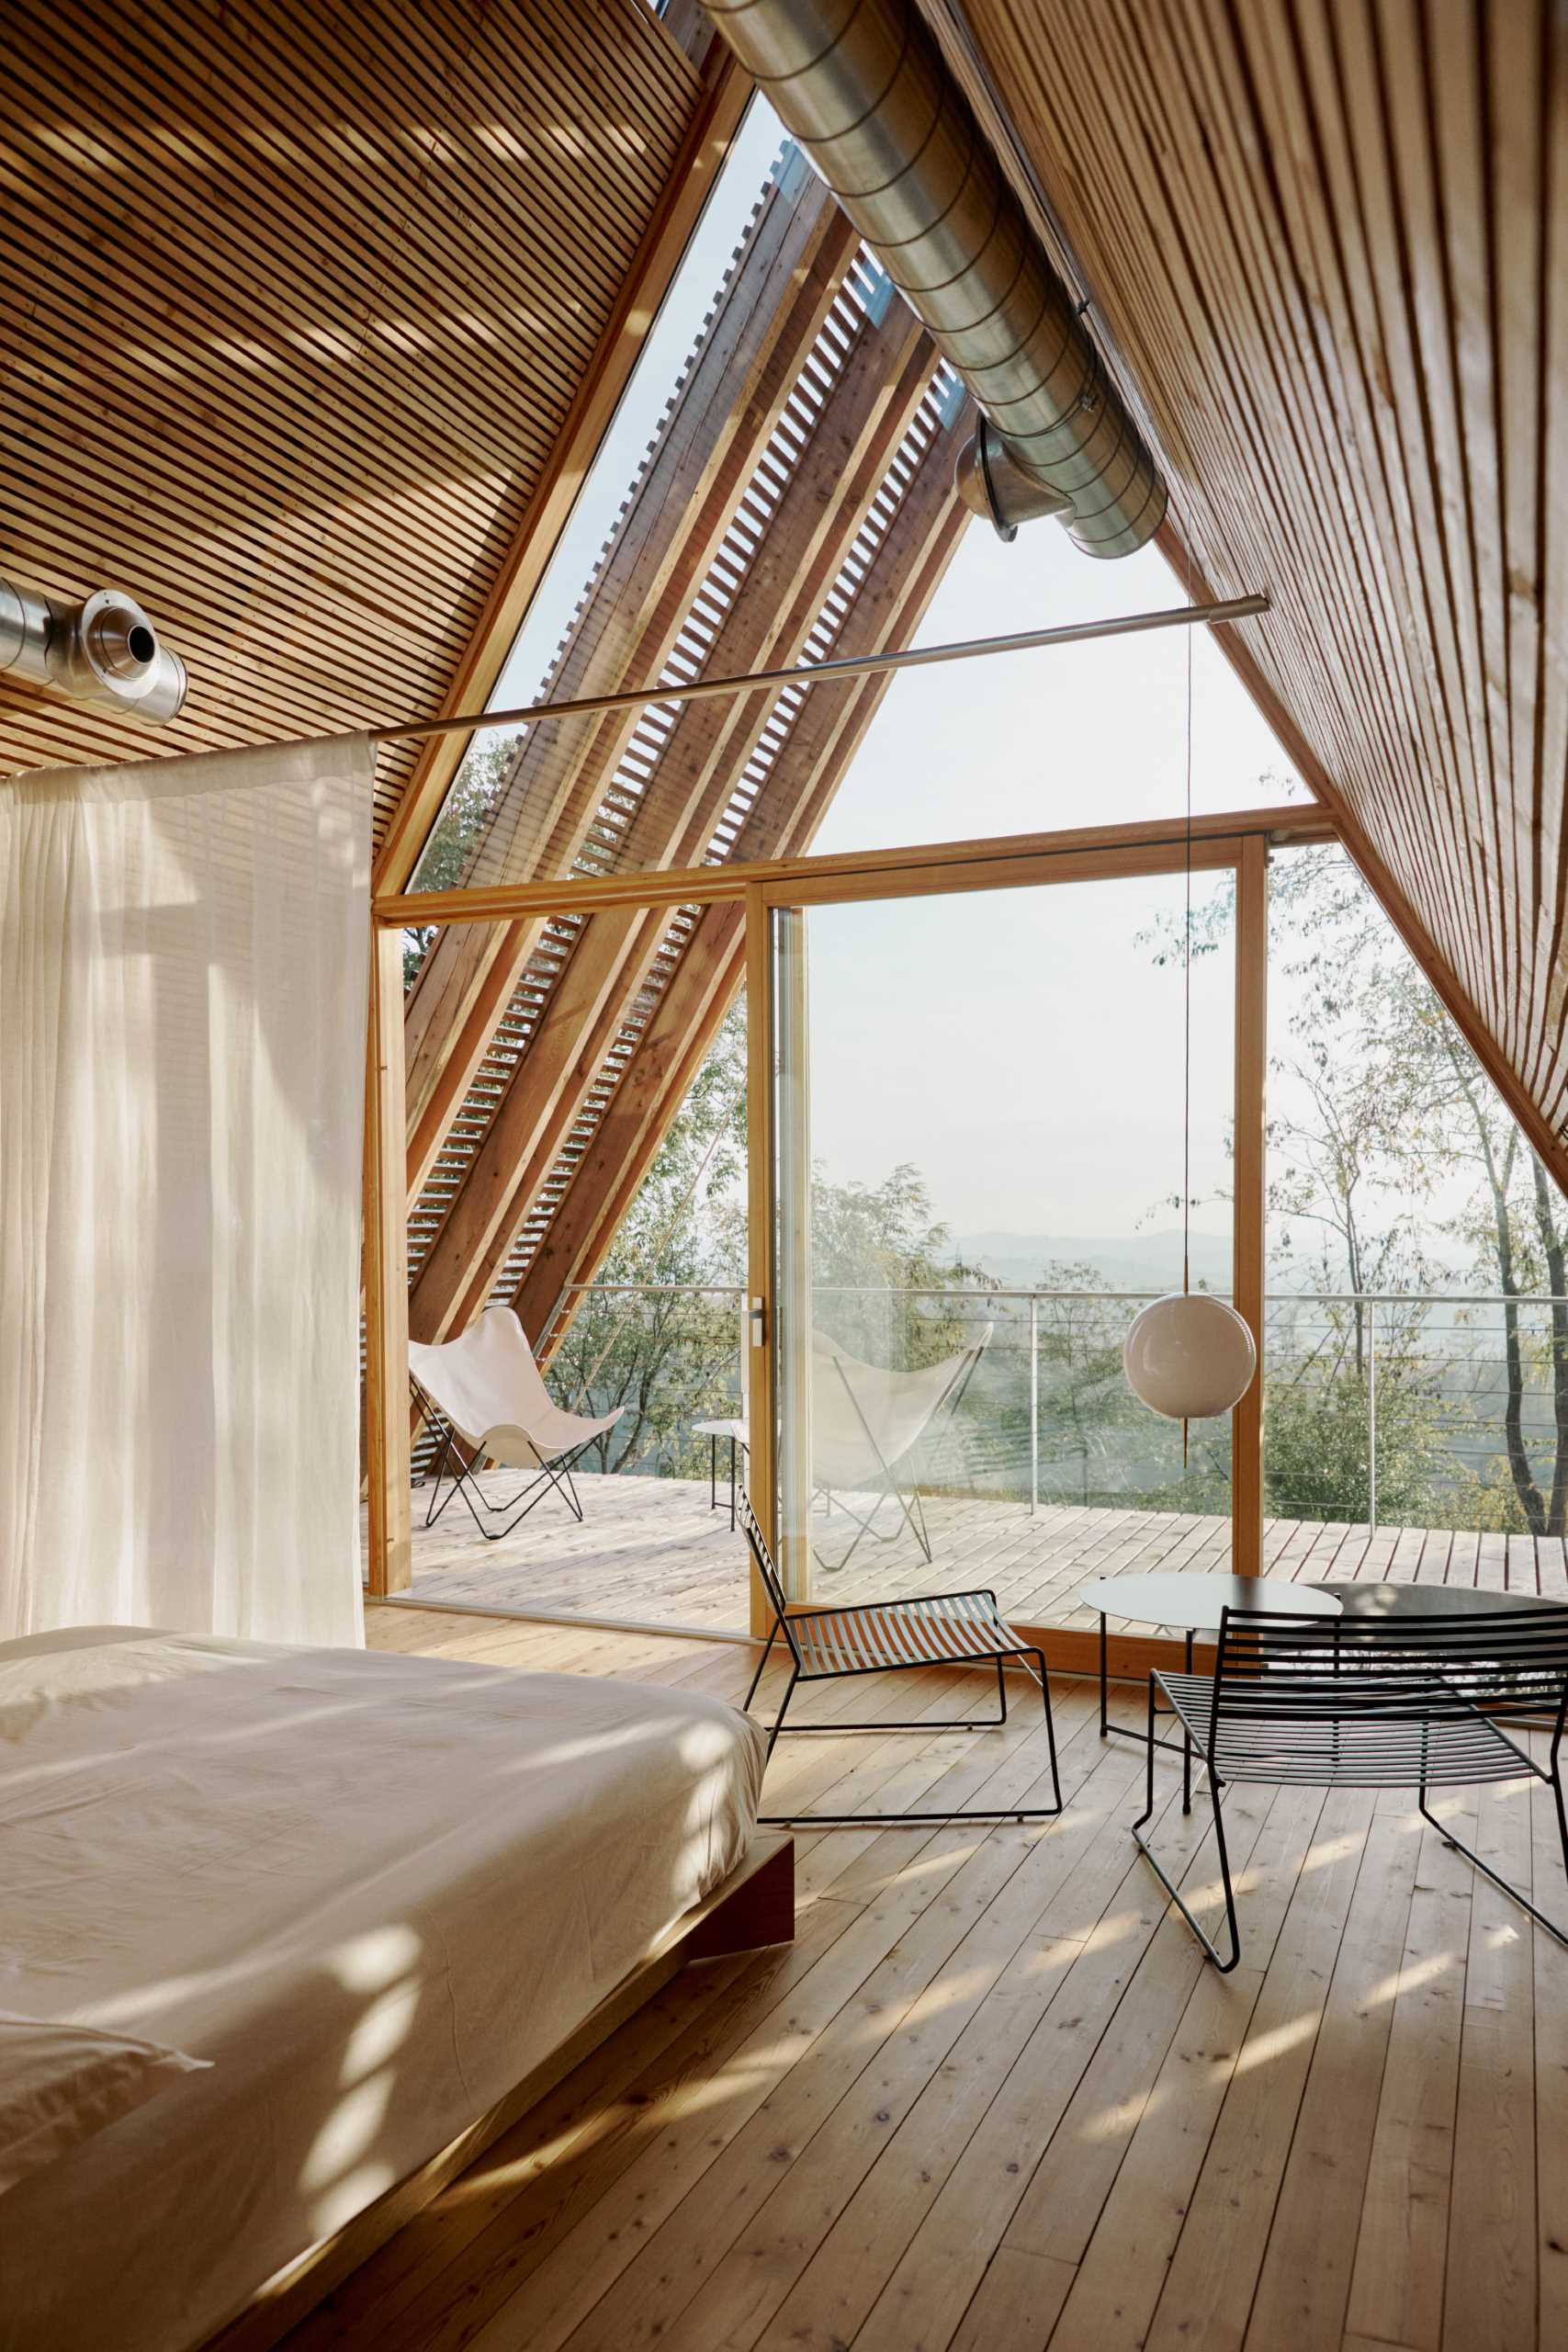 Long curtains hang from the ceiling and provide privacy for the sleeping area when closed.